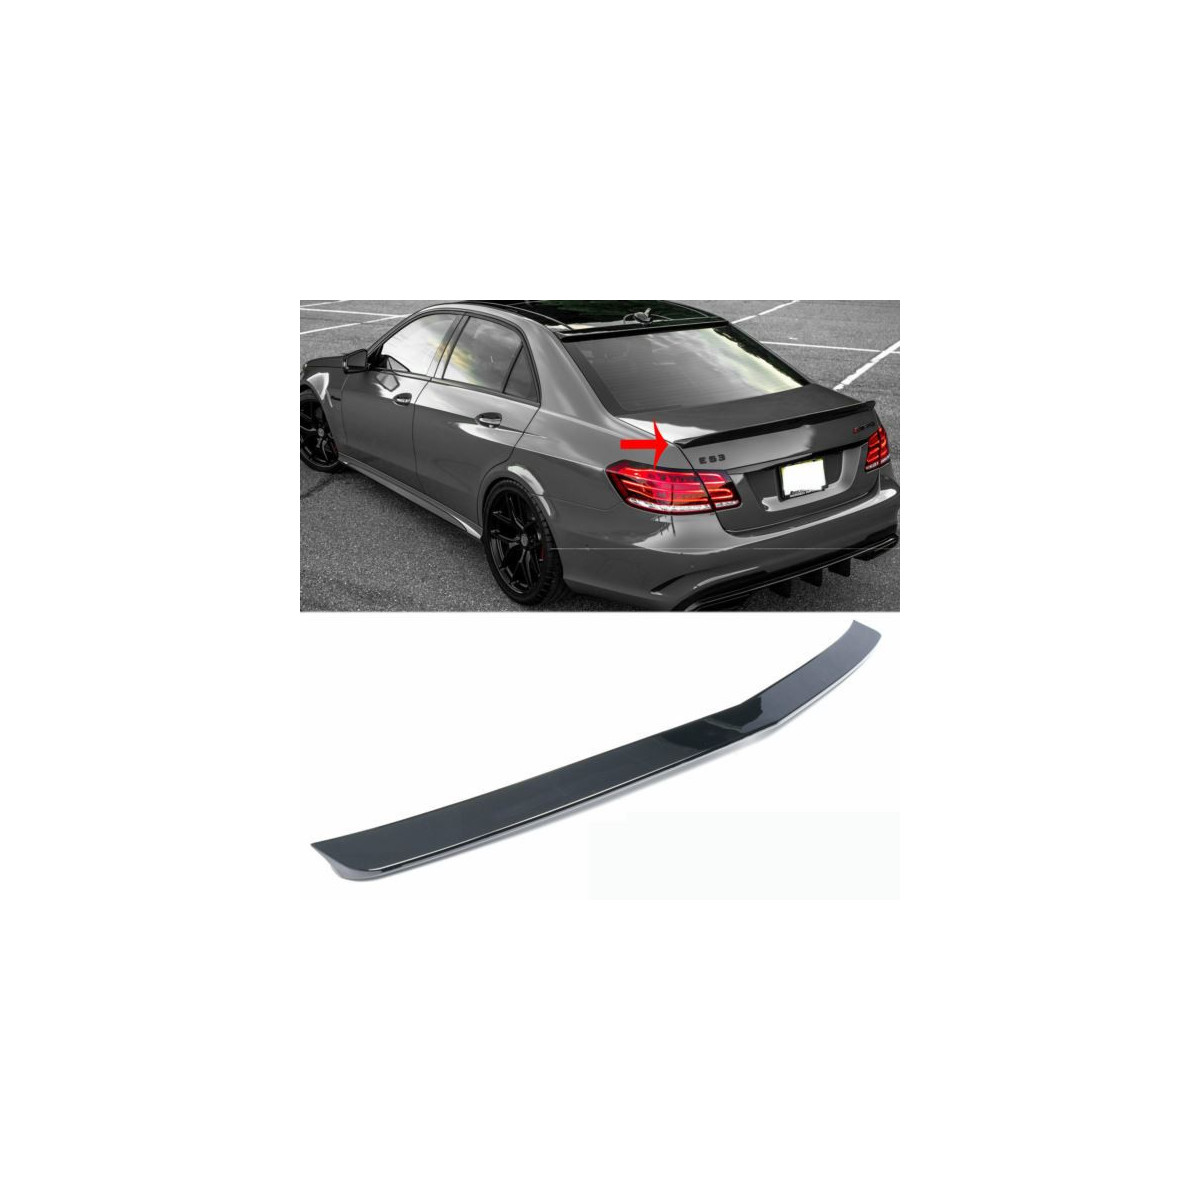 SPOILER MERCEDES W212 09-13 ABS AMG GLOSSY BLACK